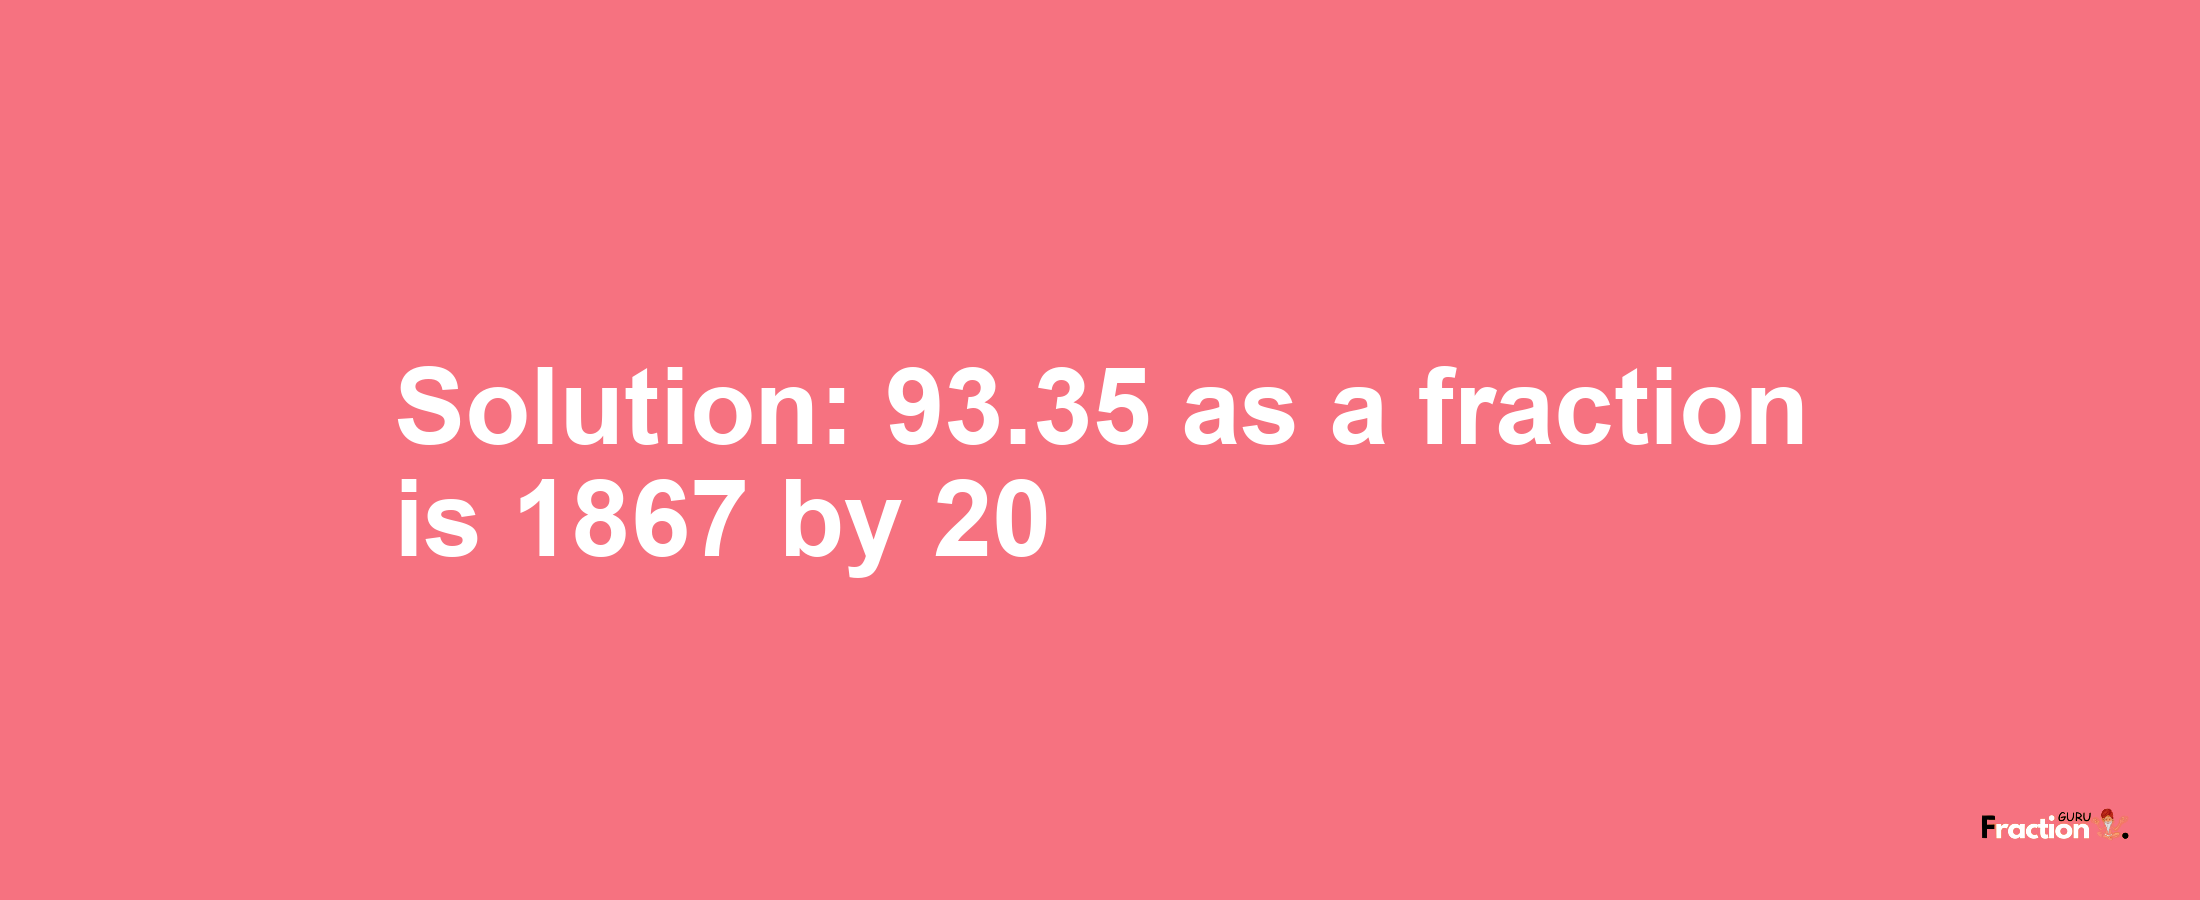 Solution:93.35 as a fraction is 1867/20